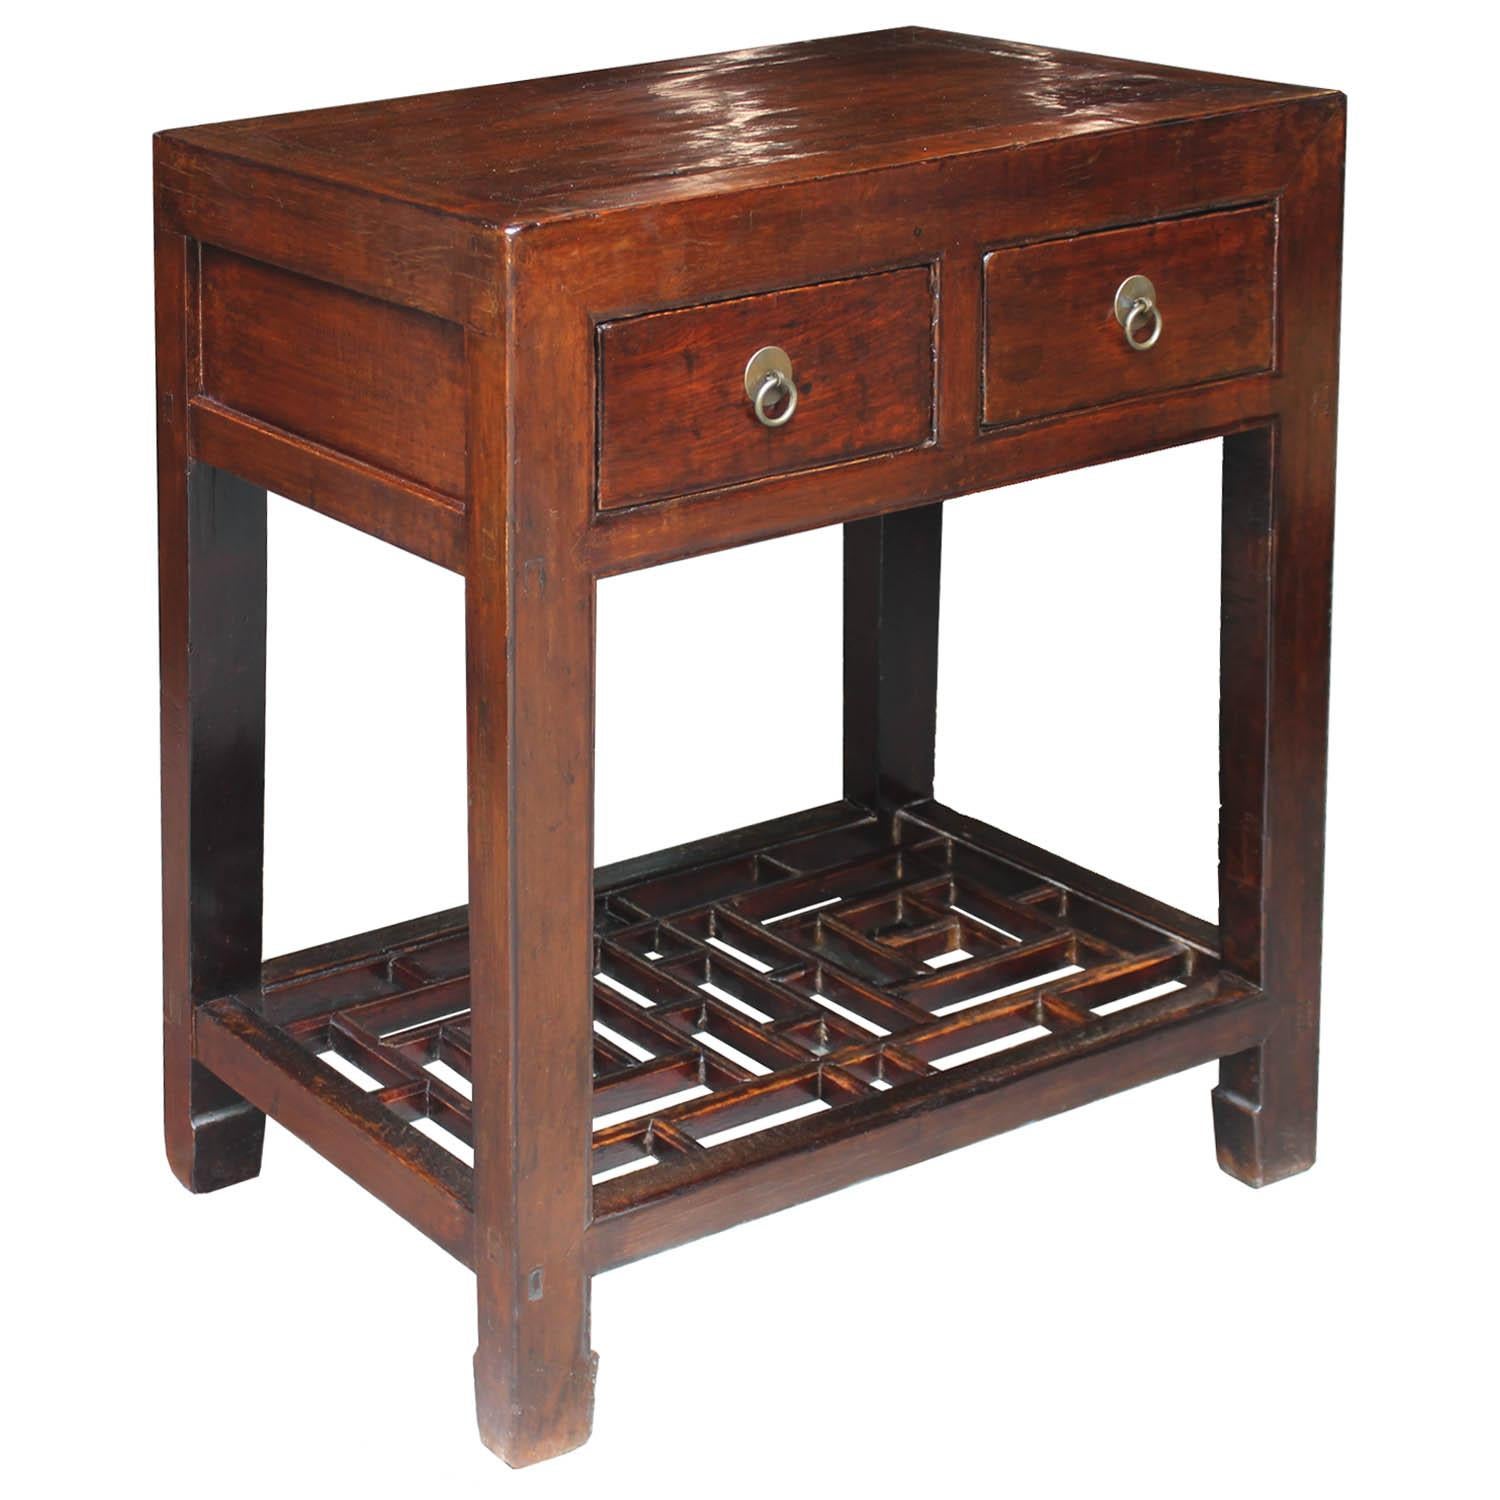 Two-drawer elmwood table with original brown lacquer, latticed bottom shelf and horse hoof-style legs can be used as a bedside table or as a console table in a small hallway. New hardware.